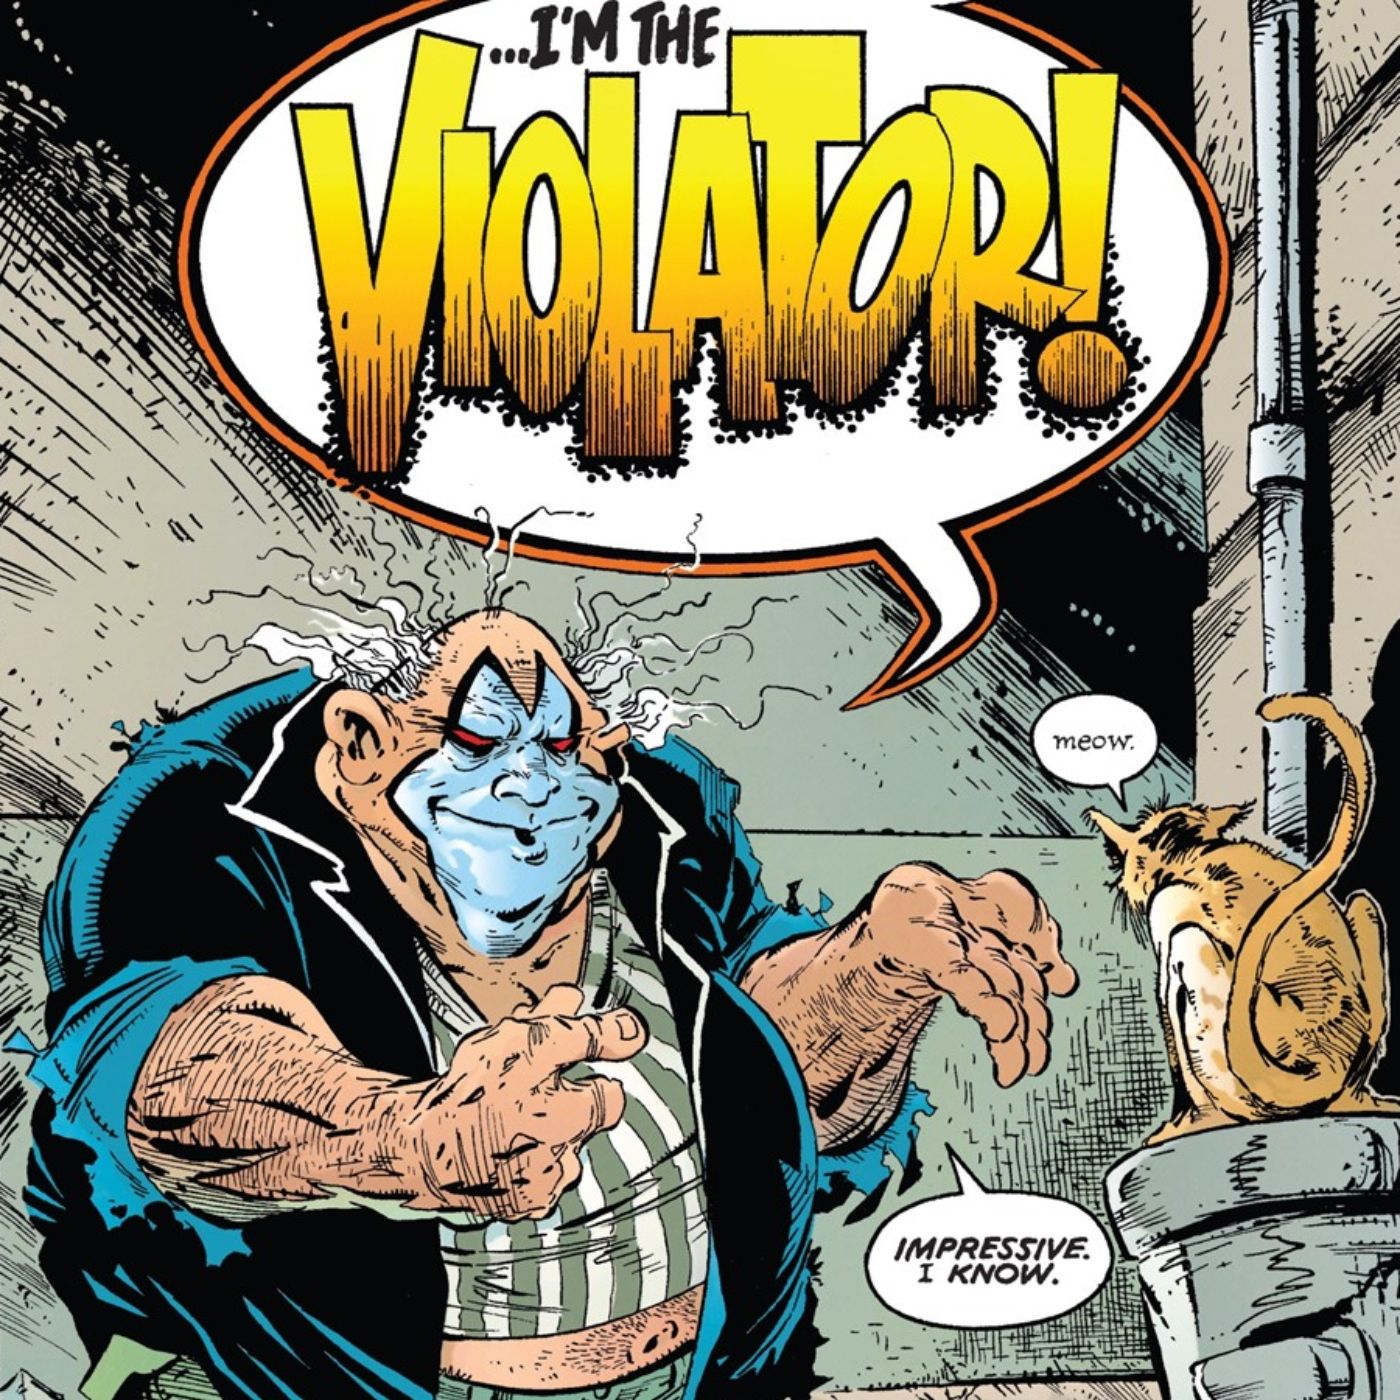 The Violator introducing himself to a stray cat in Spawn.